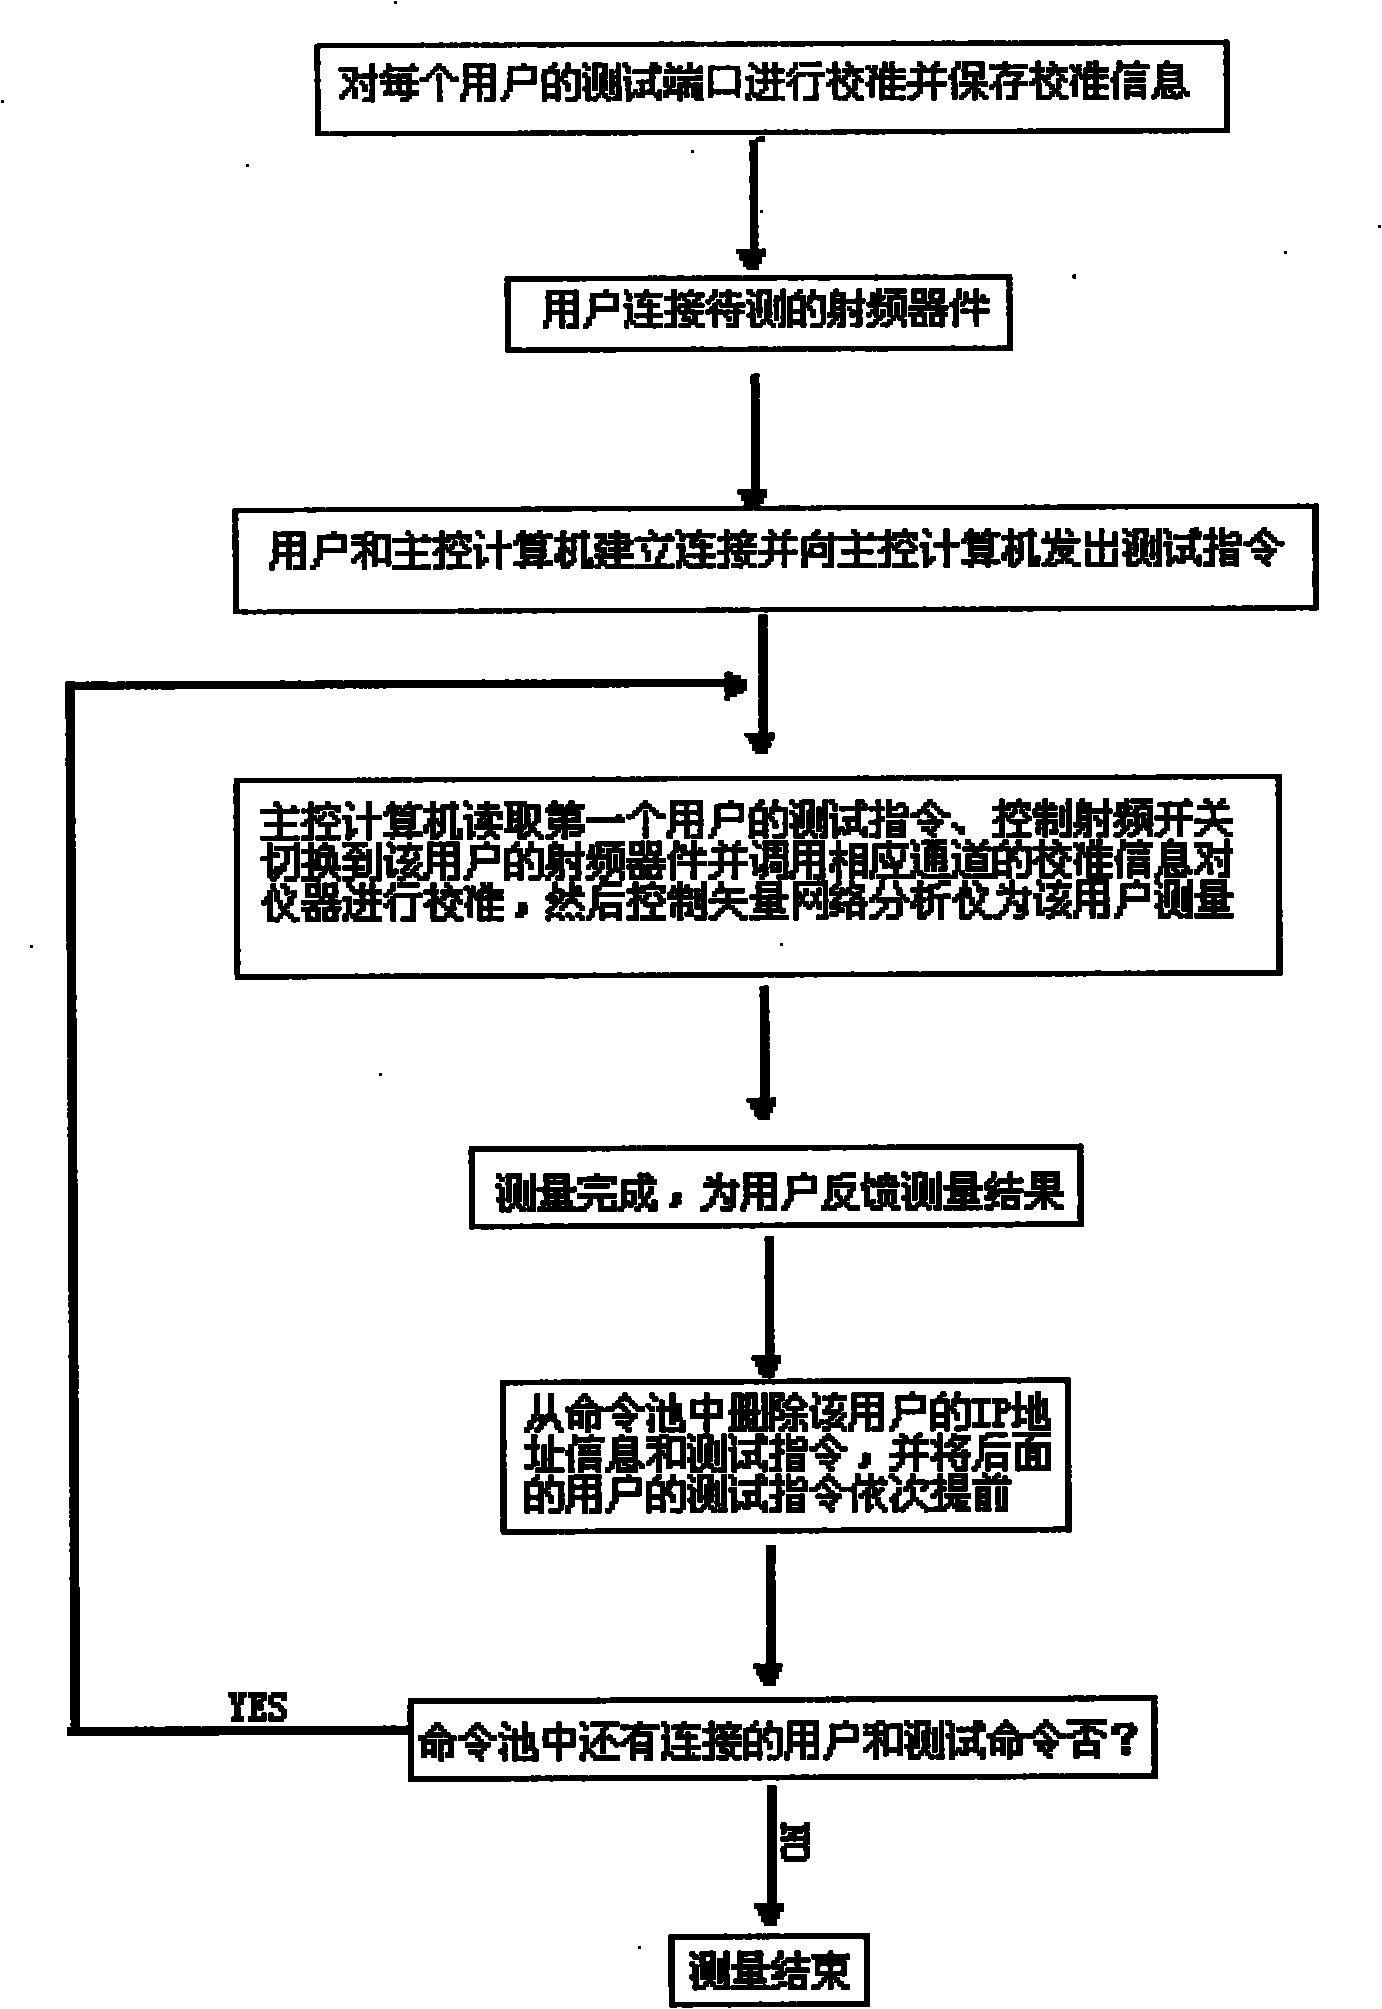 Time sharing multiplex measurement system and method based on vector network analyzer